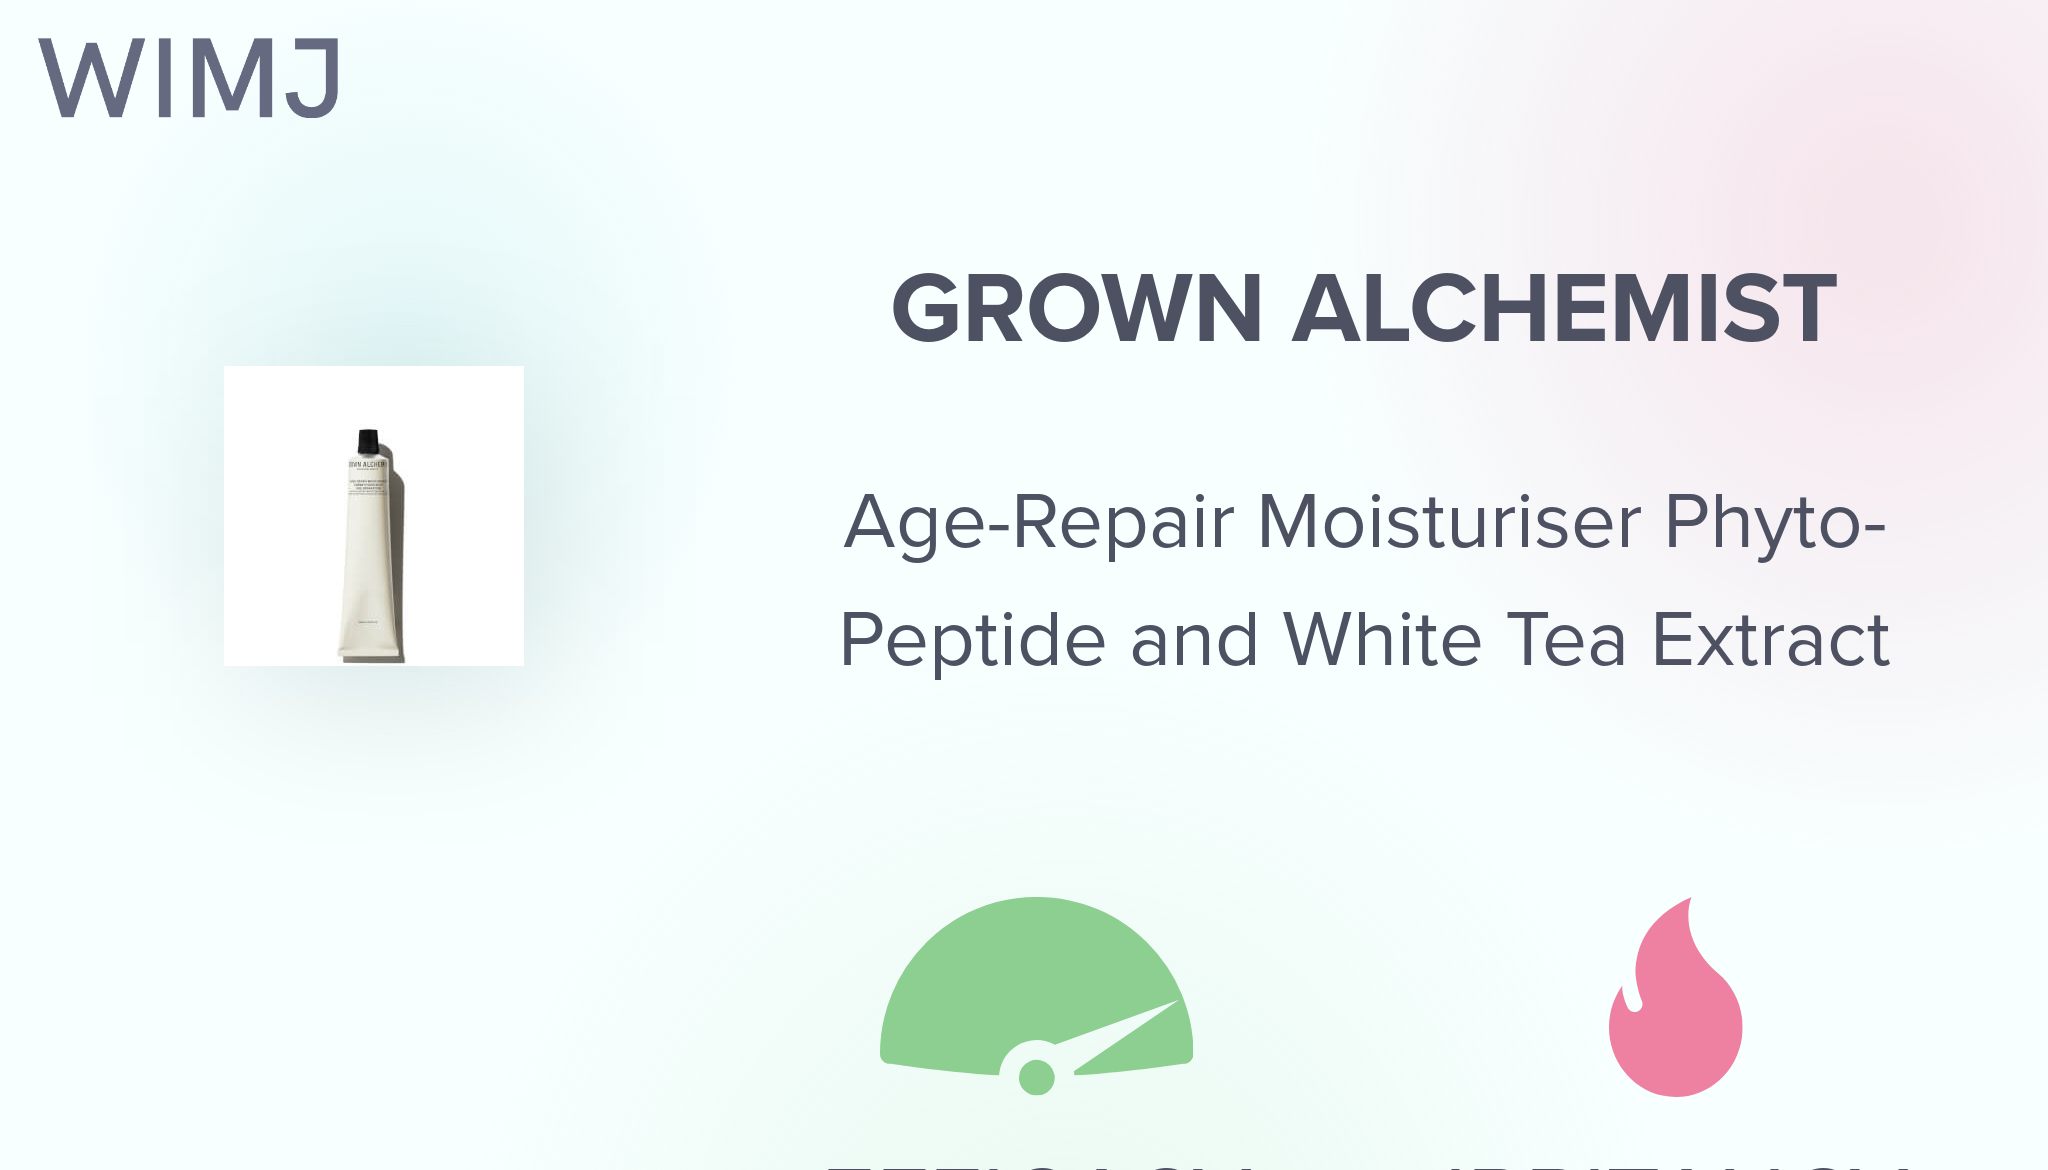 Review: Grown Alchemist - Age-Repair Moisturiser Phyto-Peptide and White  Tea Extract - WIMJ